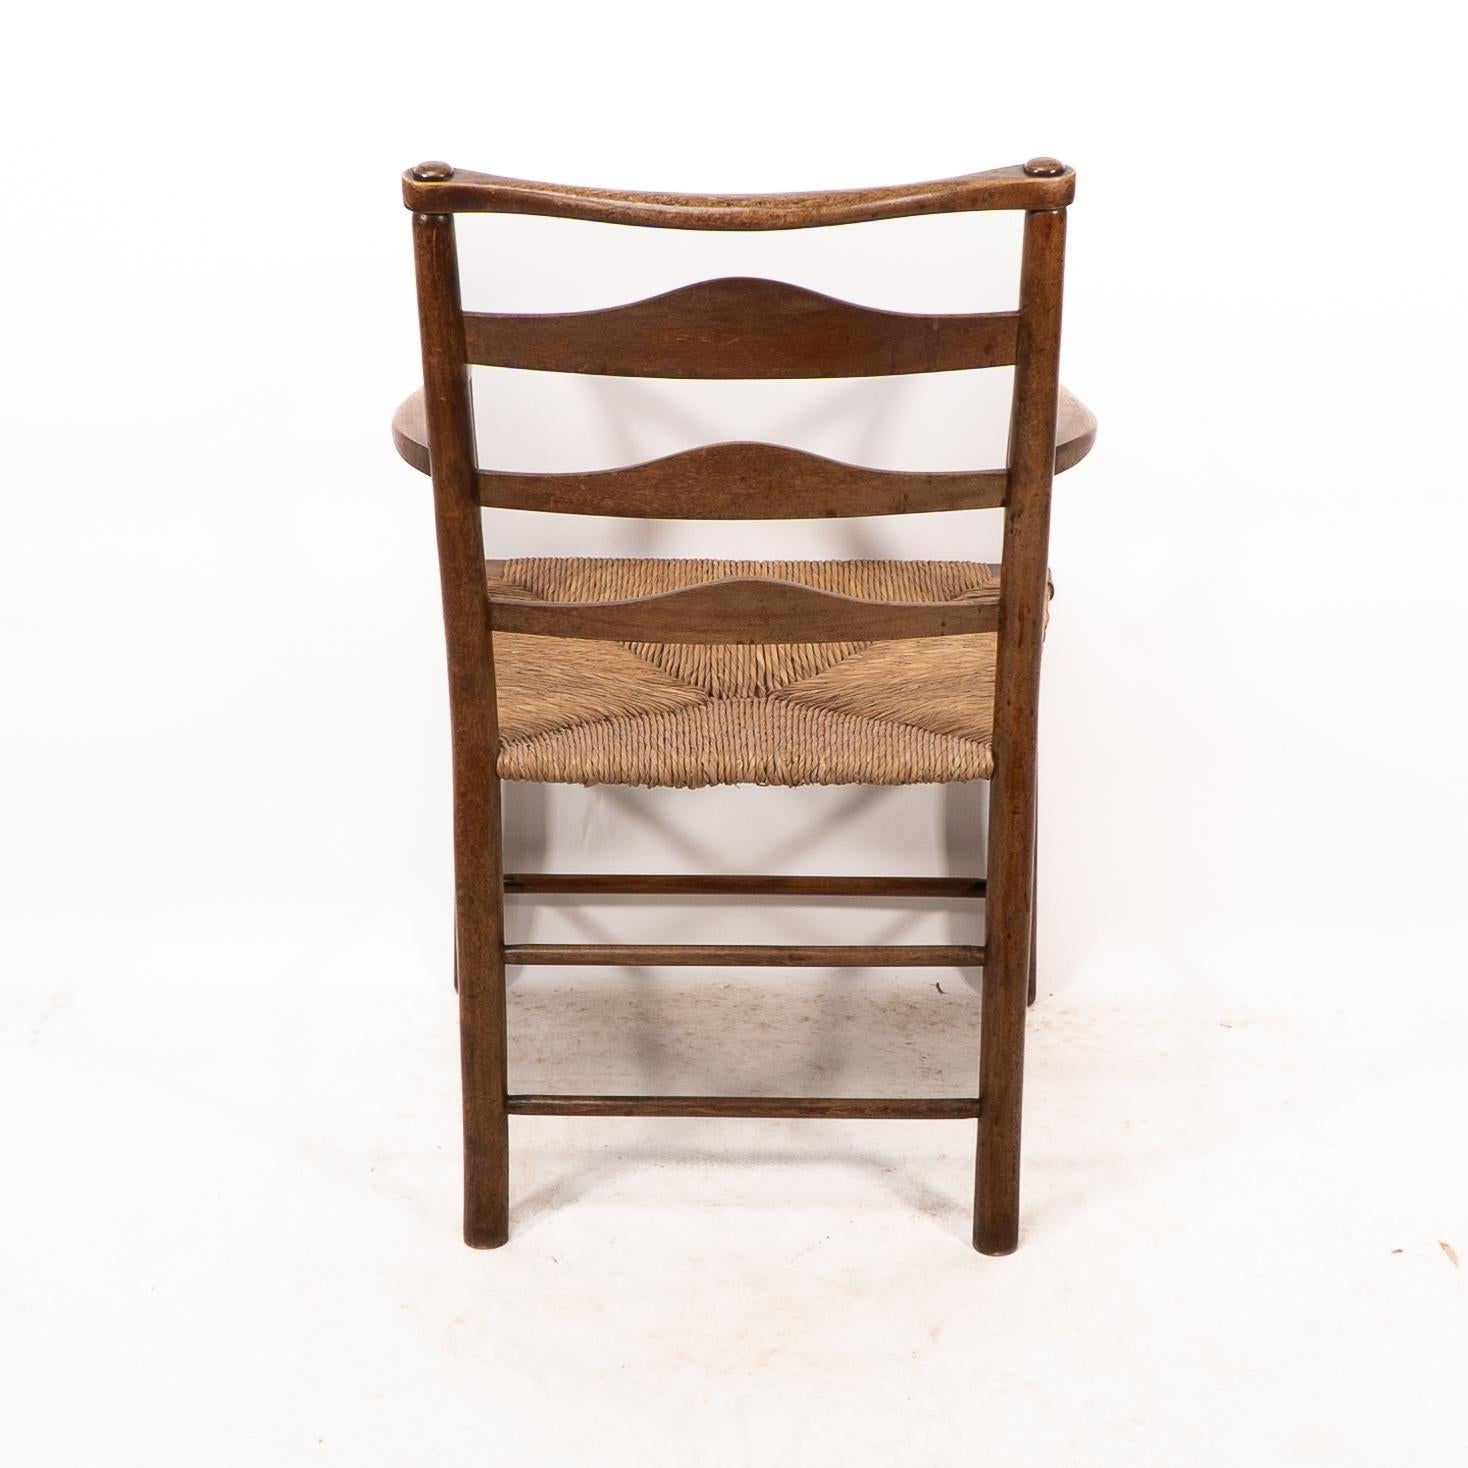 C R Ashbee. An Arts and Crafts rush seat ladder back armchair For Sale 9